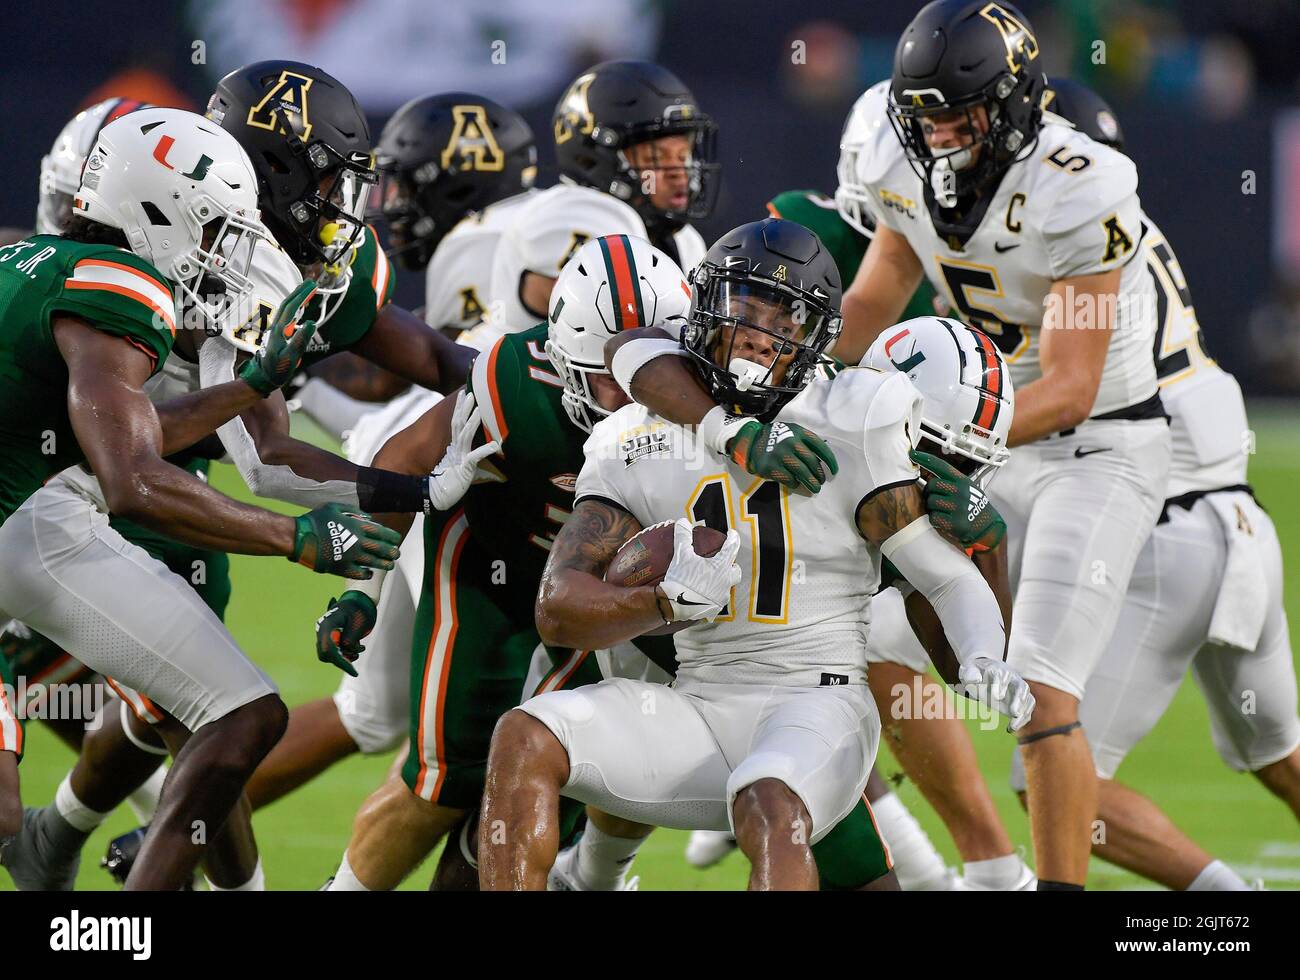 Miami Gardens, United States. 11th Sep, 2021. Appalachian State receiver Jalen Virgil (11) is stopped by the Miami defense during the first half at Hard Rock Stadium in Miami Gardens, Fla., on Saturday, Sept. 11, 2021. The host Hurricanes won, 25-23. (Photo by Michael Laughlin/South Florida Sun Sentinel/TNS/Sipa USA) Credit: Sipa USA/Alamy Live News Stock Photo